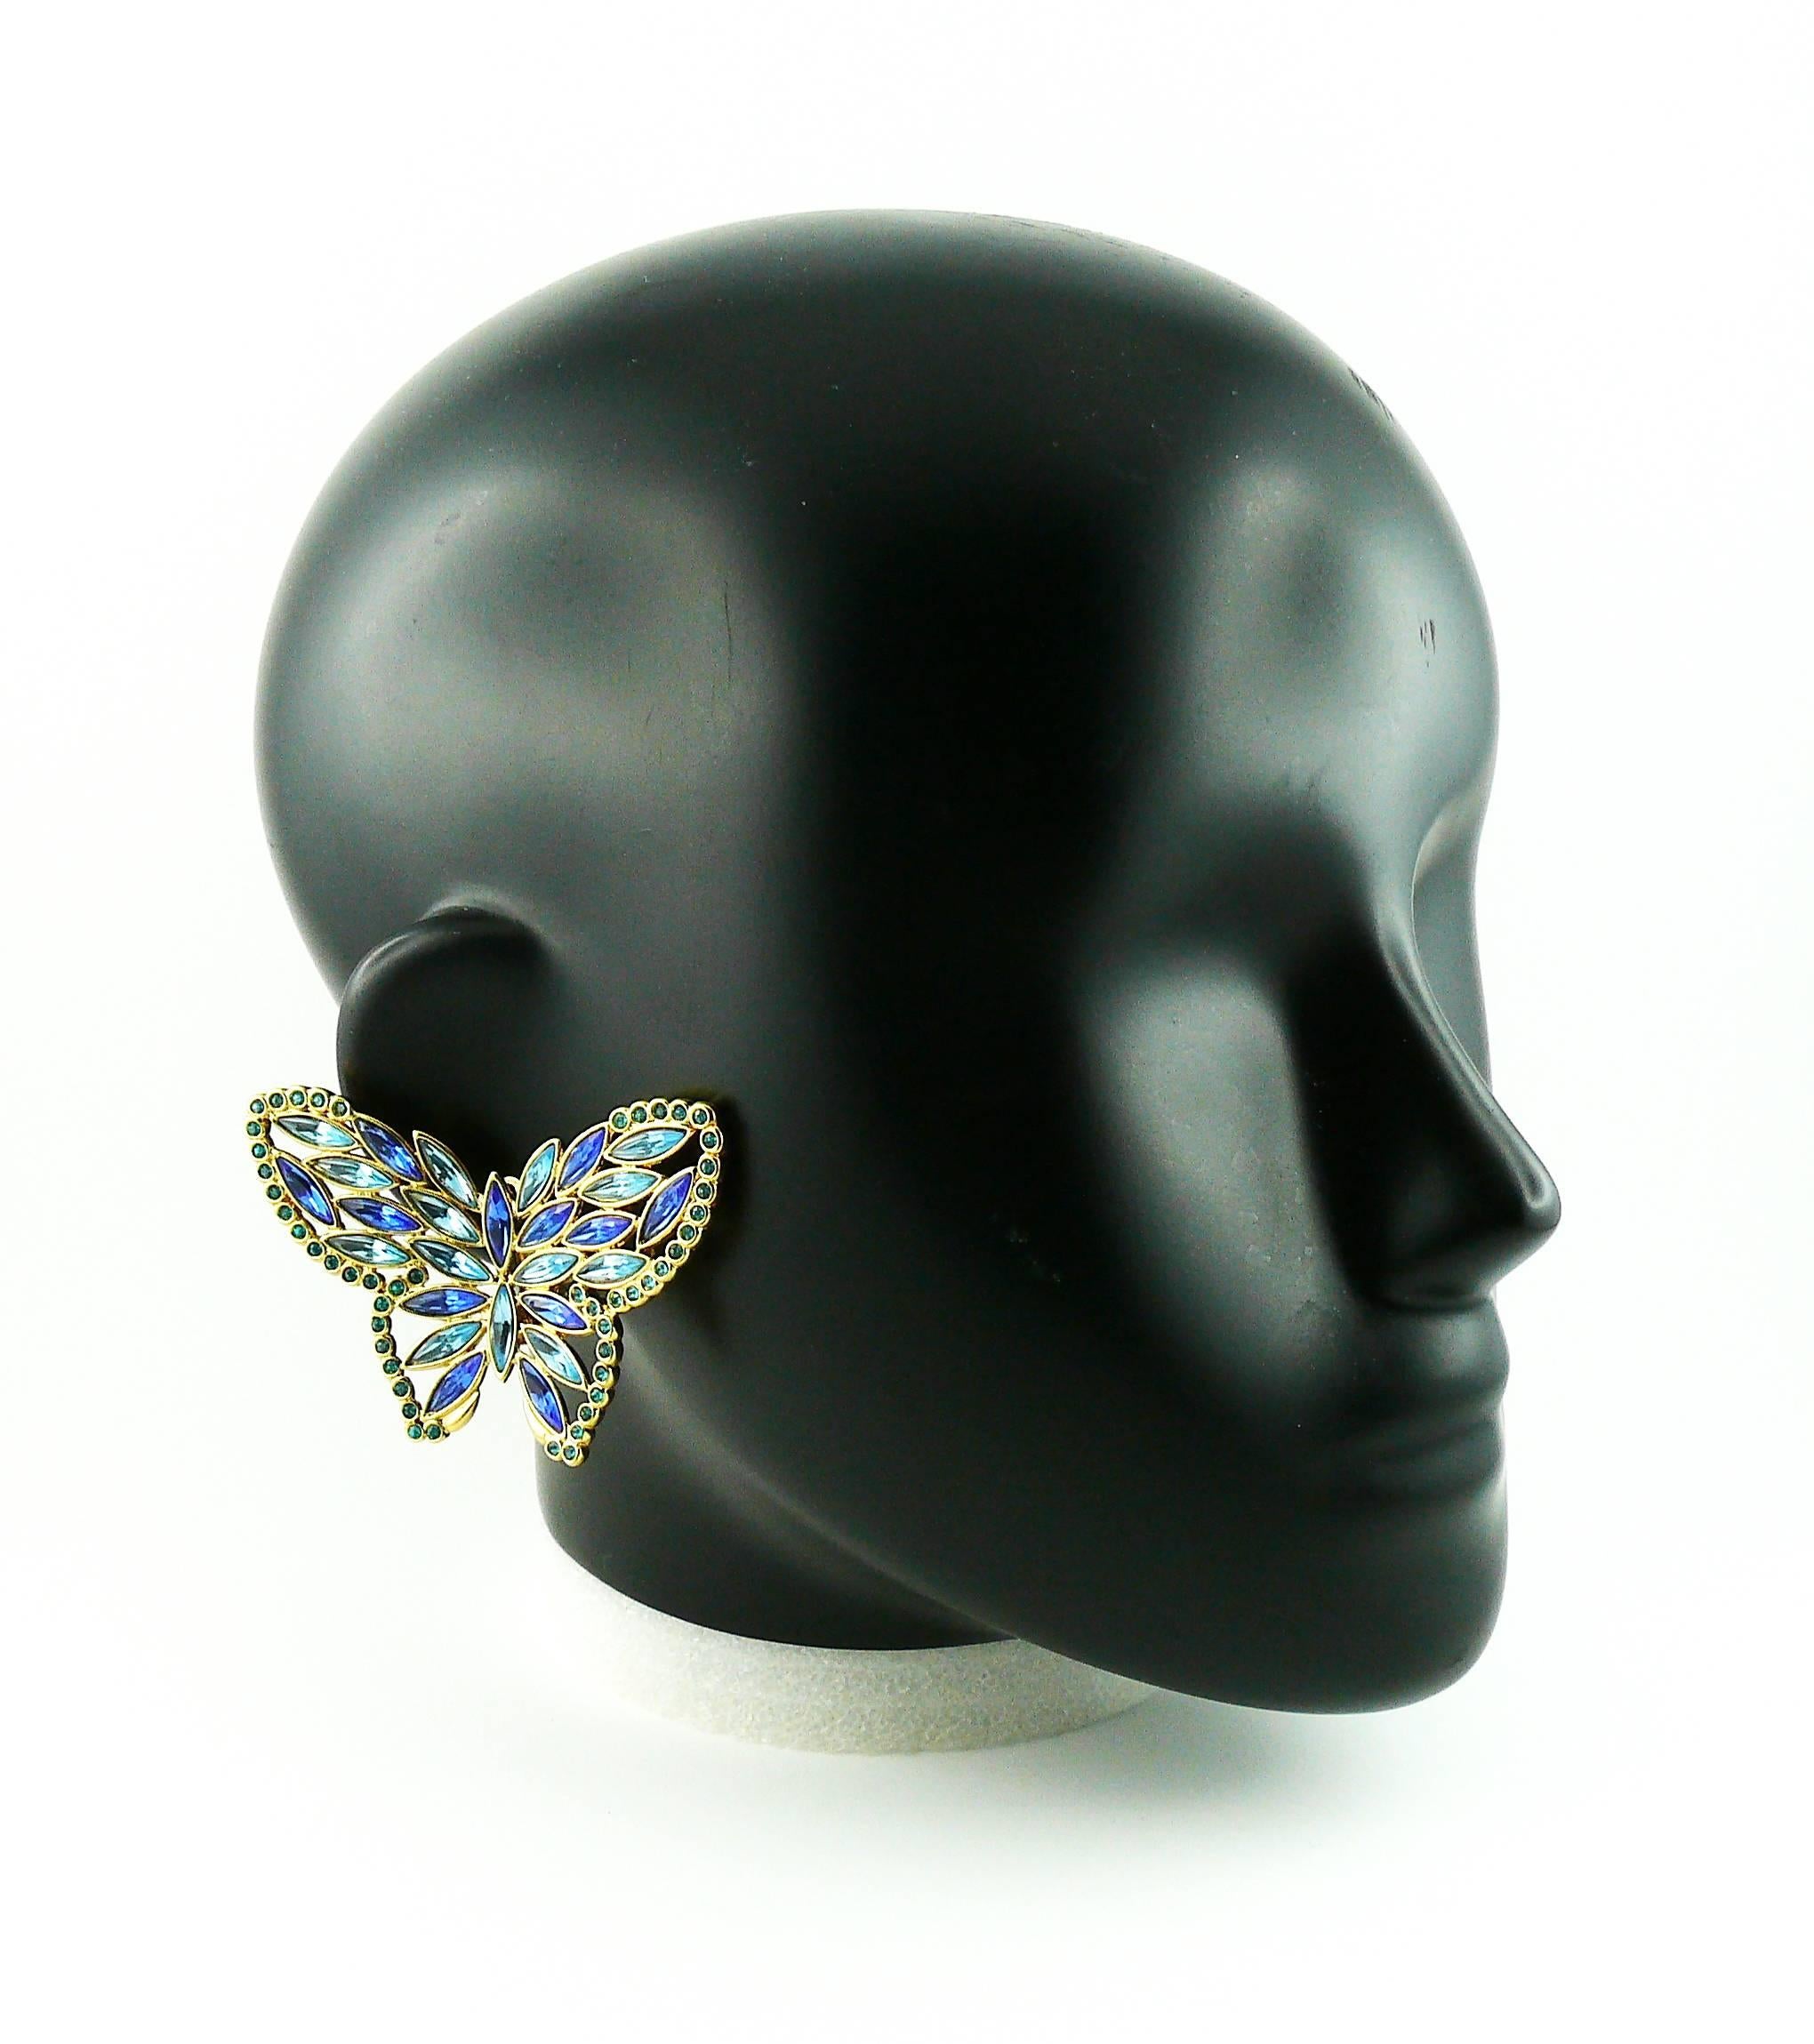 YVES SAINT LAURENT vintage massive openwork butterfly clip-on earrings with blue shade crystal embellishement.

Rare !

Marked YSL Made in France.

JEWELRY CONDITION CHART
- New or never worn : item is in pristine condition with no noticeable